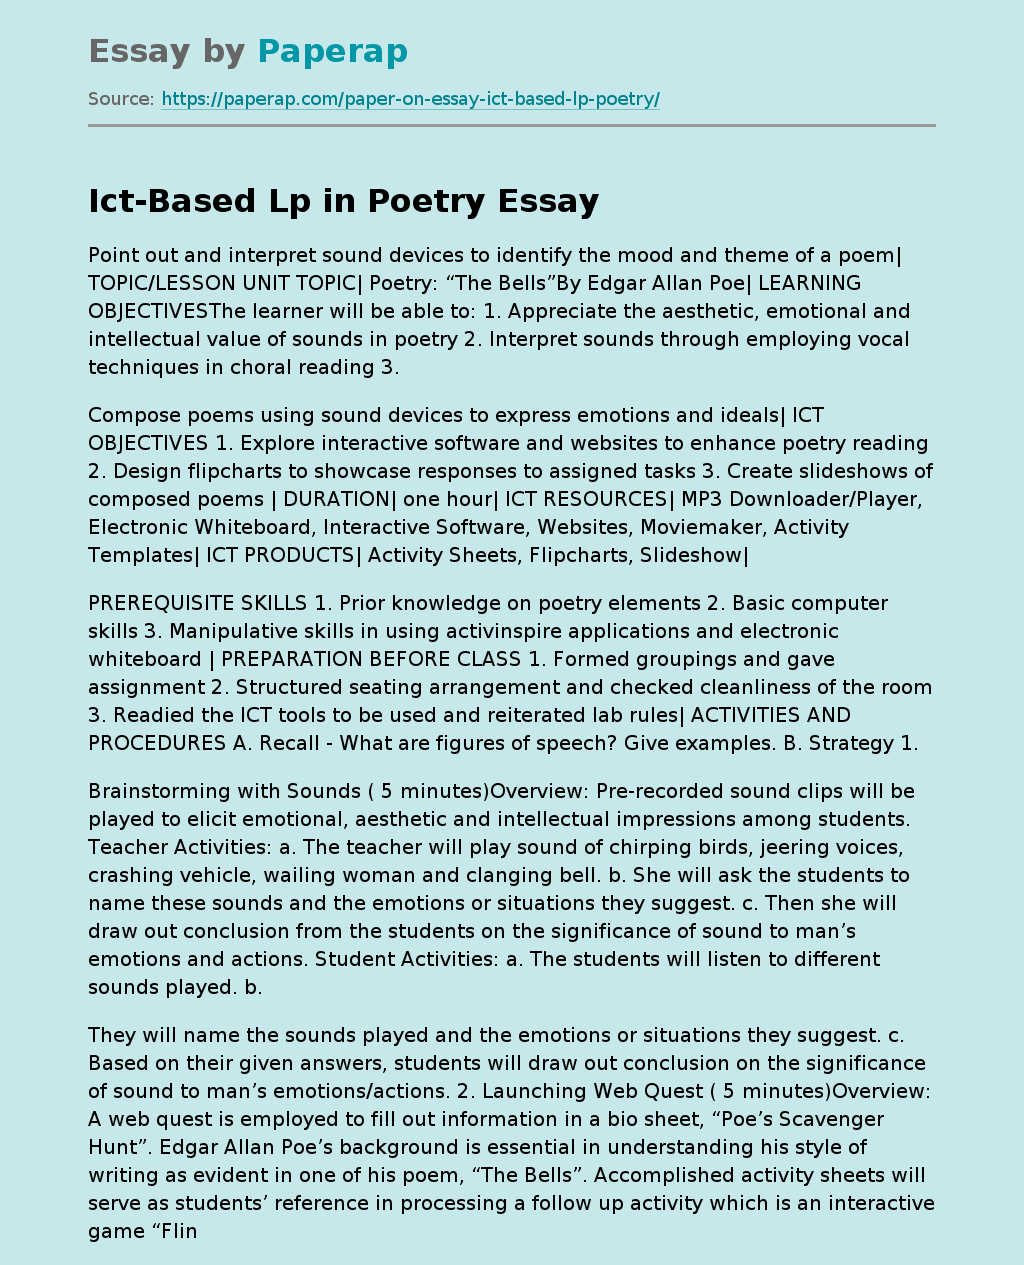 Ict-Based Lp in Poetry